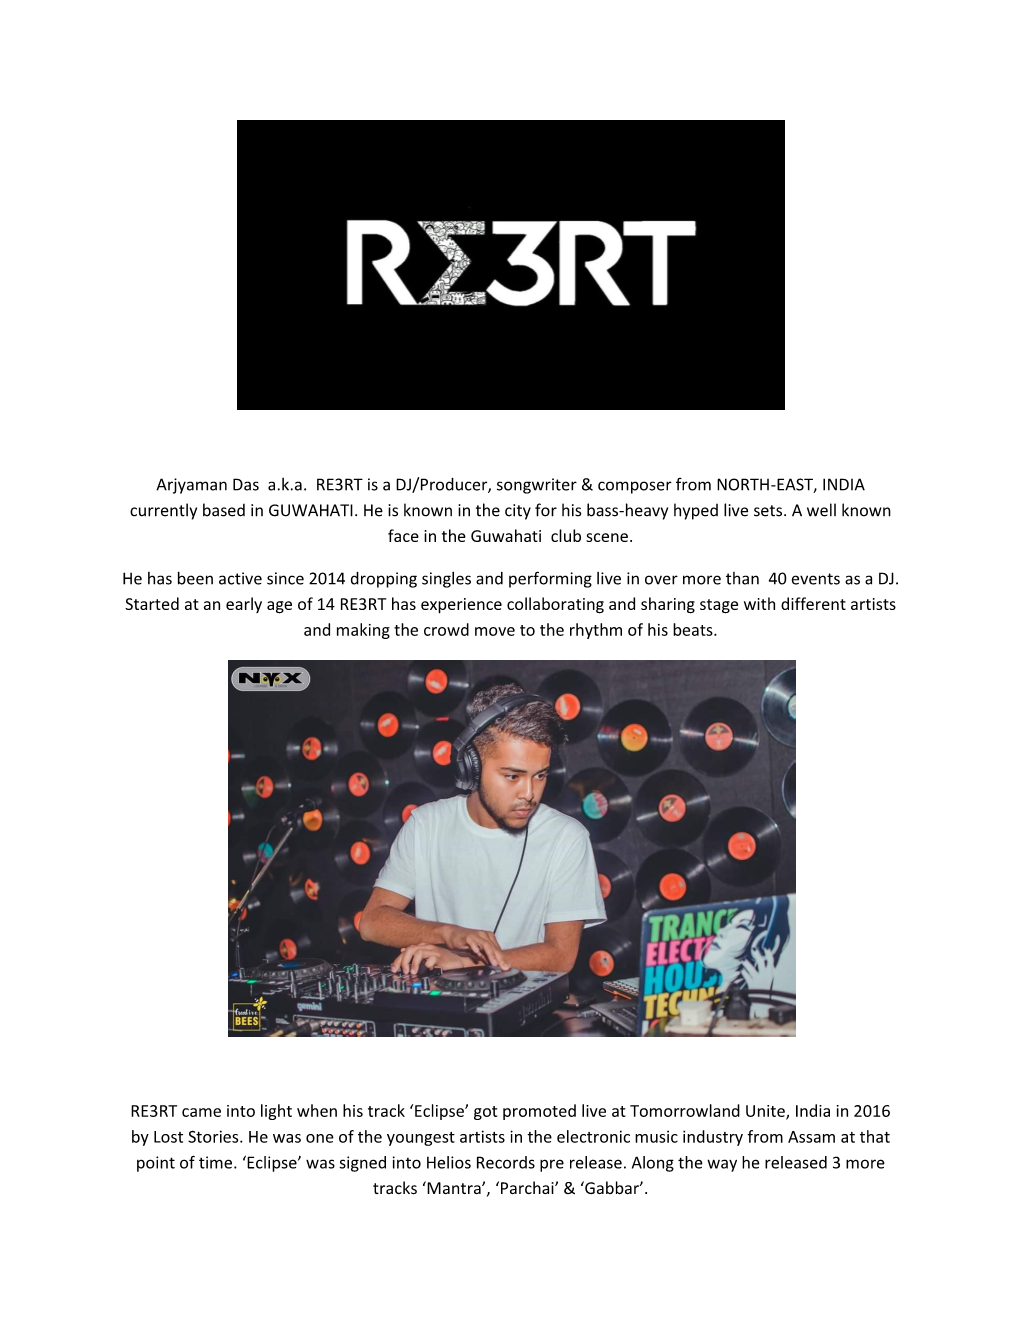 Arjyaman Das A.K.A. RE3RT Is a DJ/Producer, Songwriter & Composer from NORTH-EAST, INDIA Currently Based in GUWAHATI